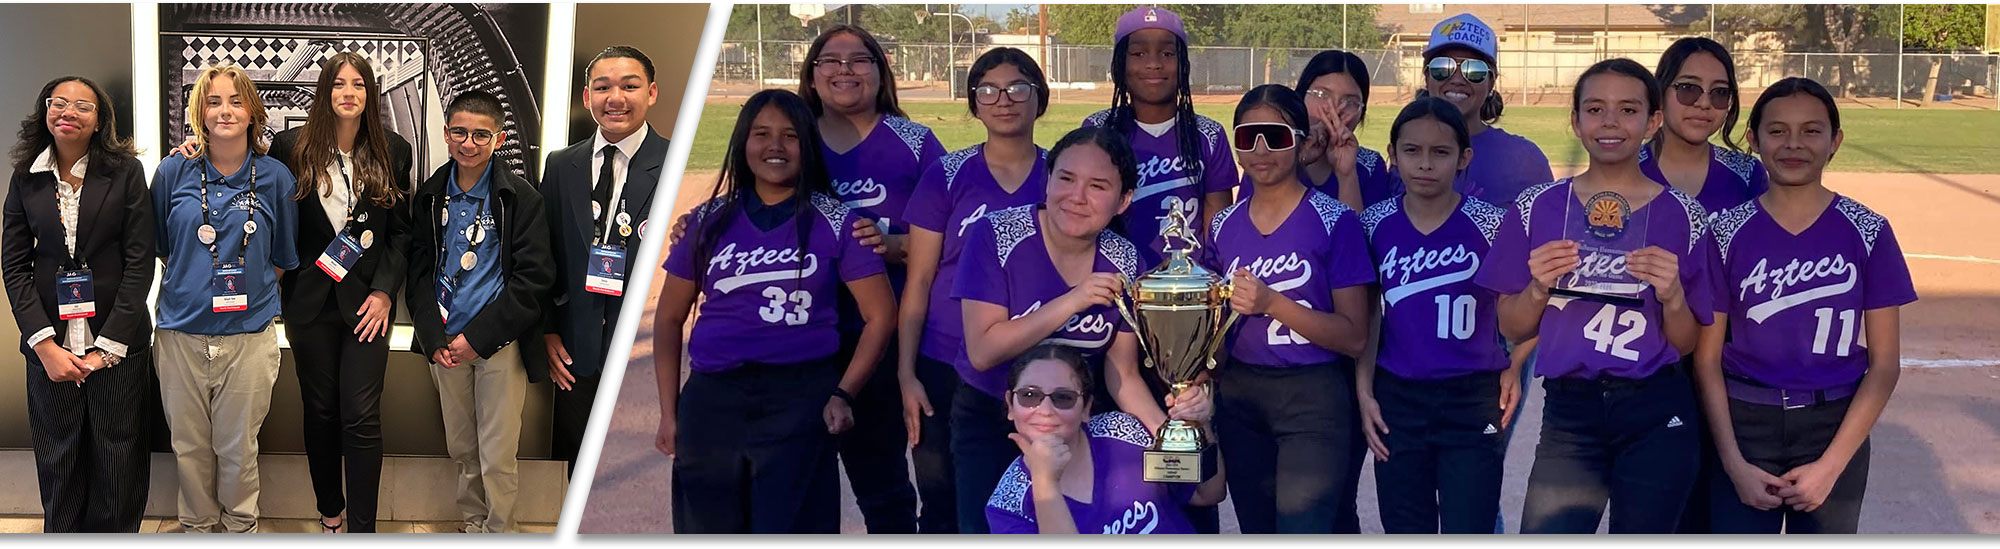 Students at a conference, and softball team holding a trophy